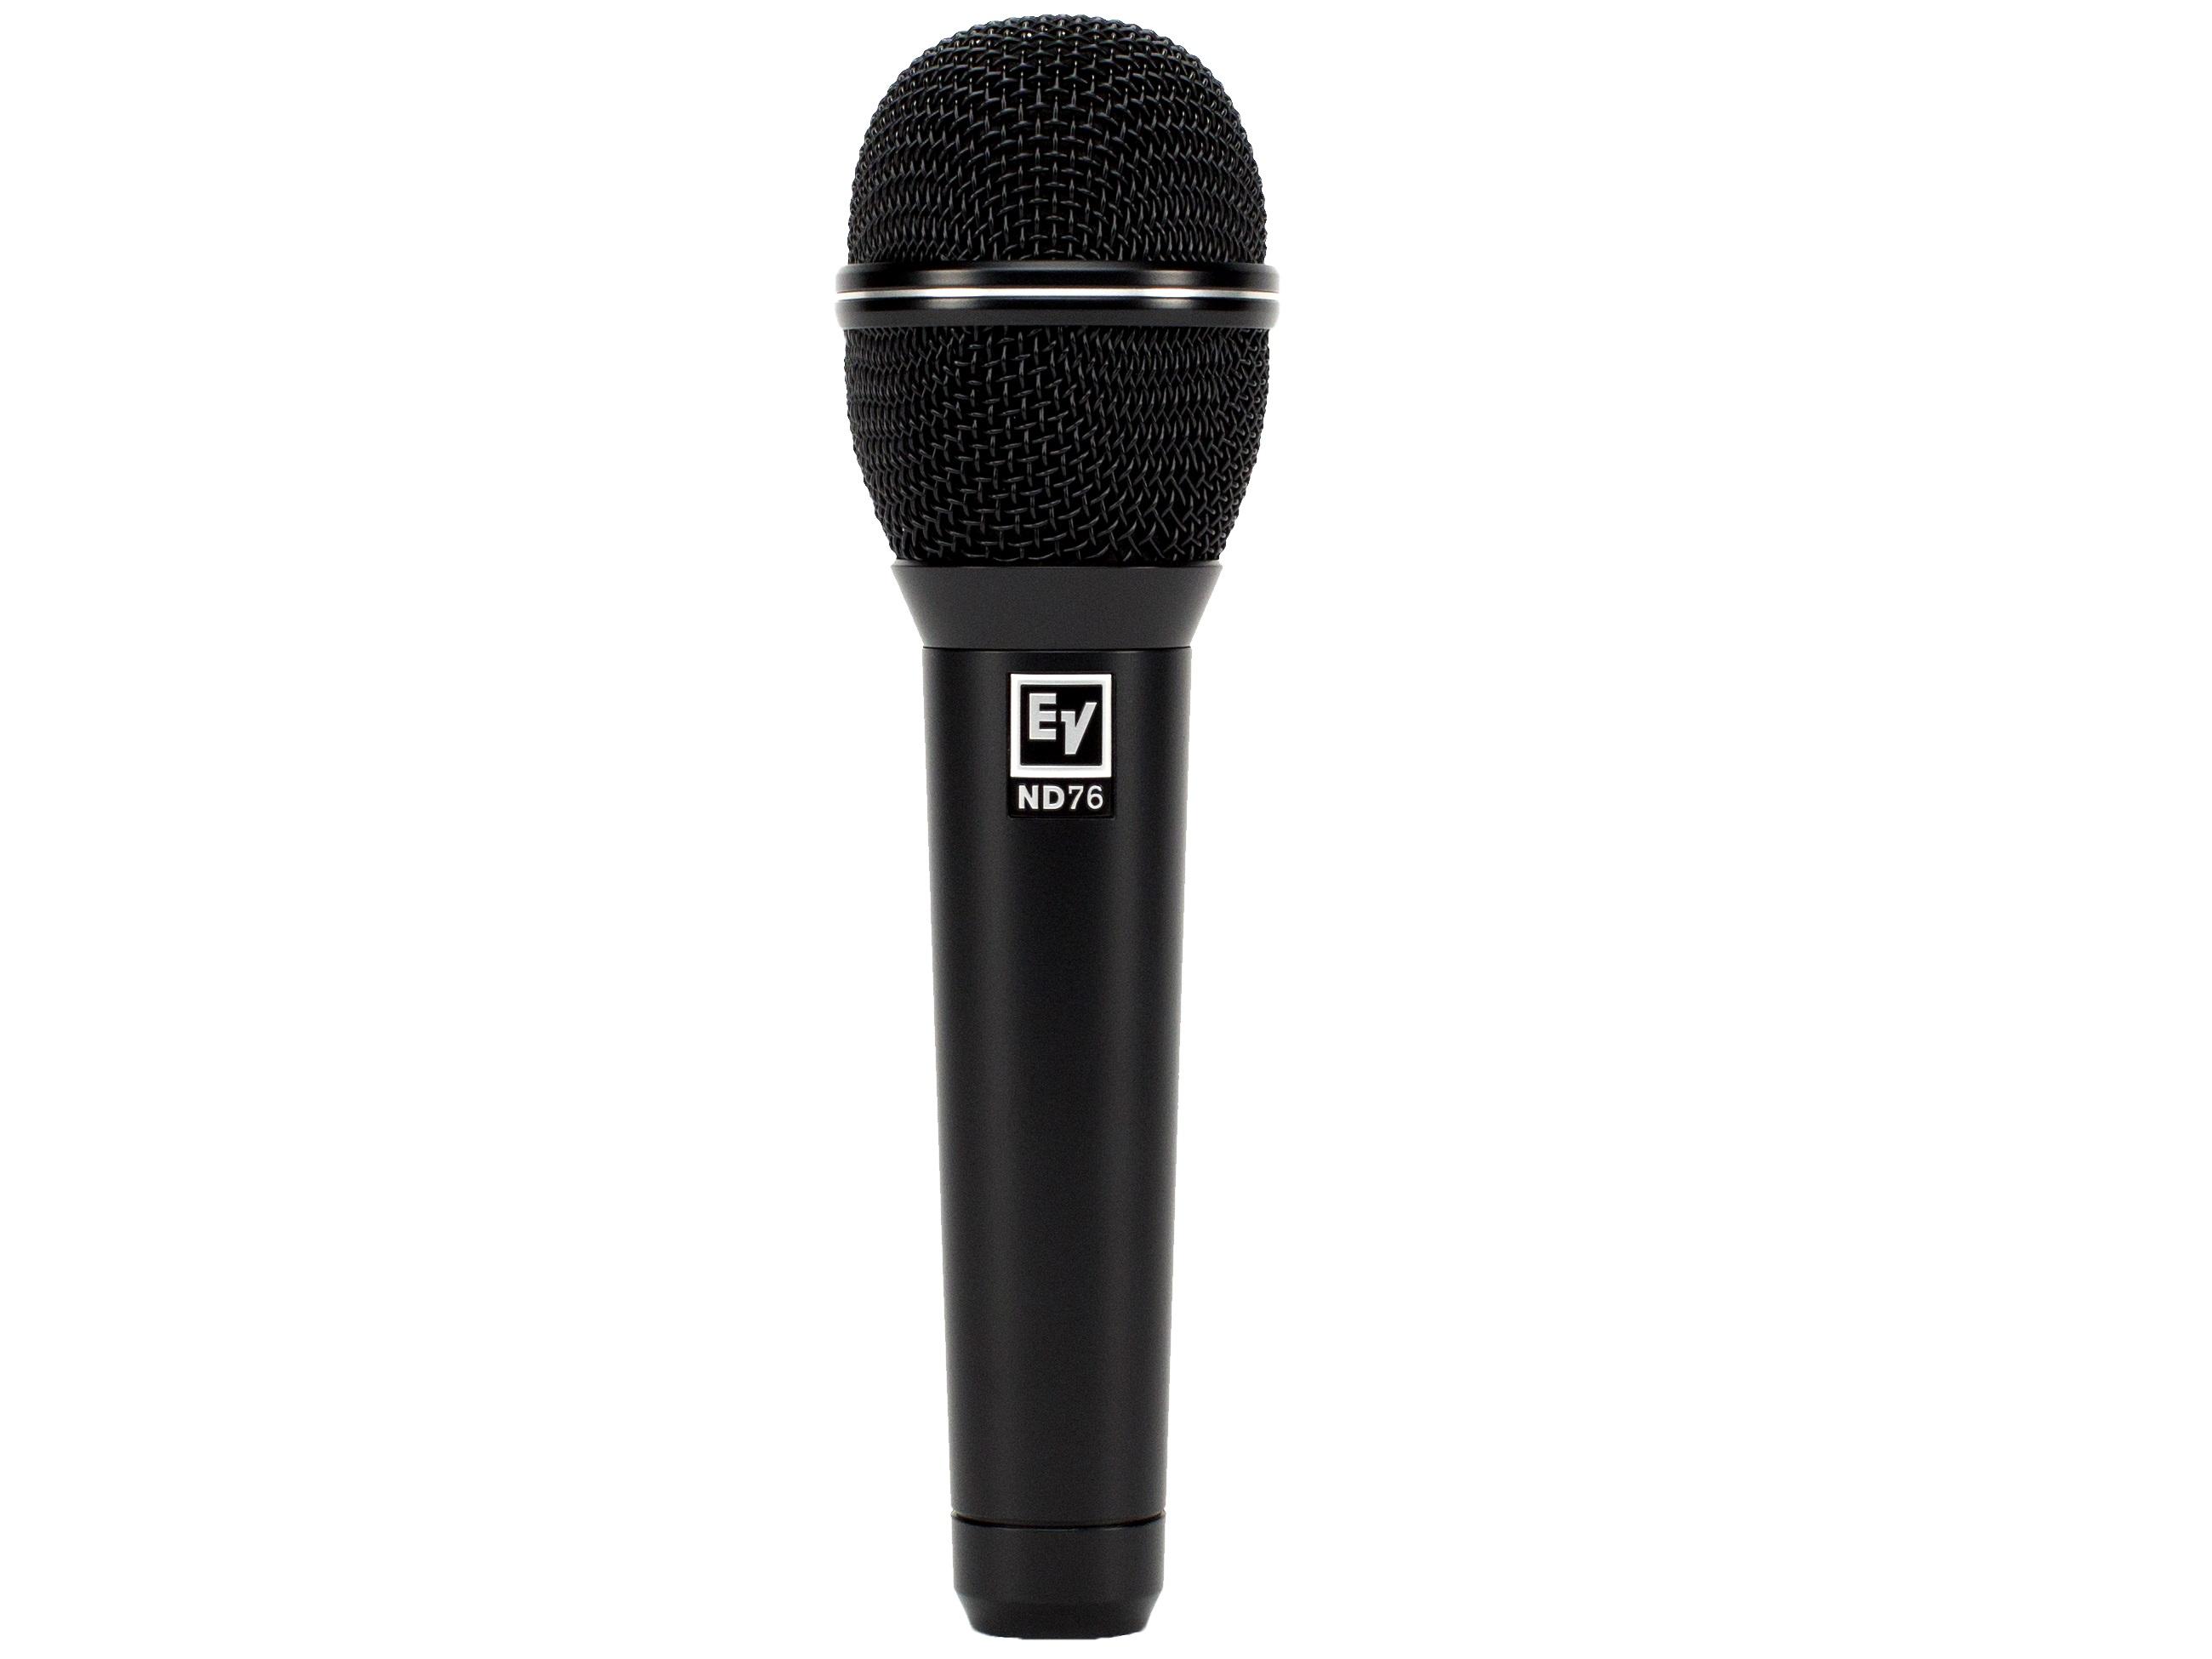 ND76 Cardioid Dynamic Vocal Microphone by Electro-Voice